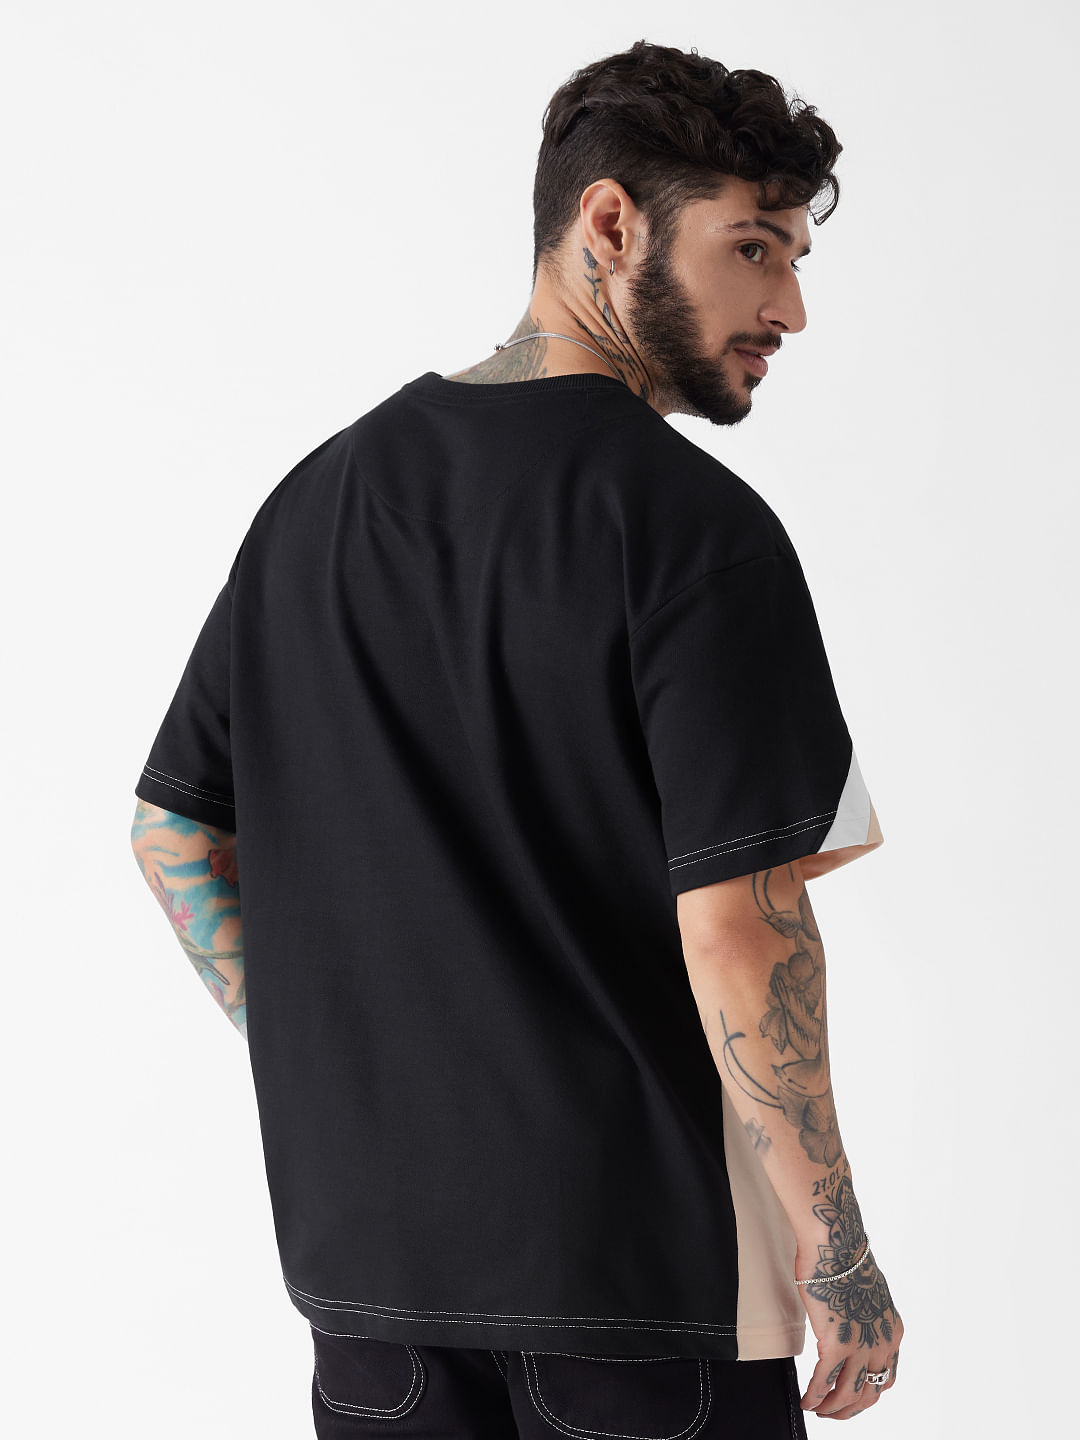 Buy Solids: Peach & Black (Utility) Oversized T-Shirts Online